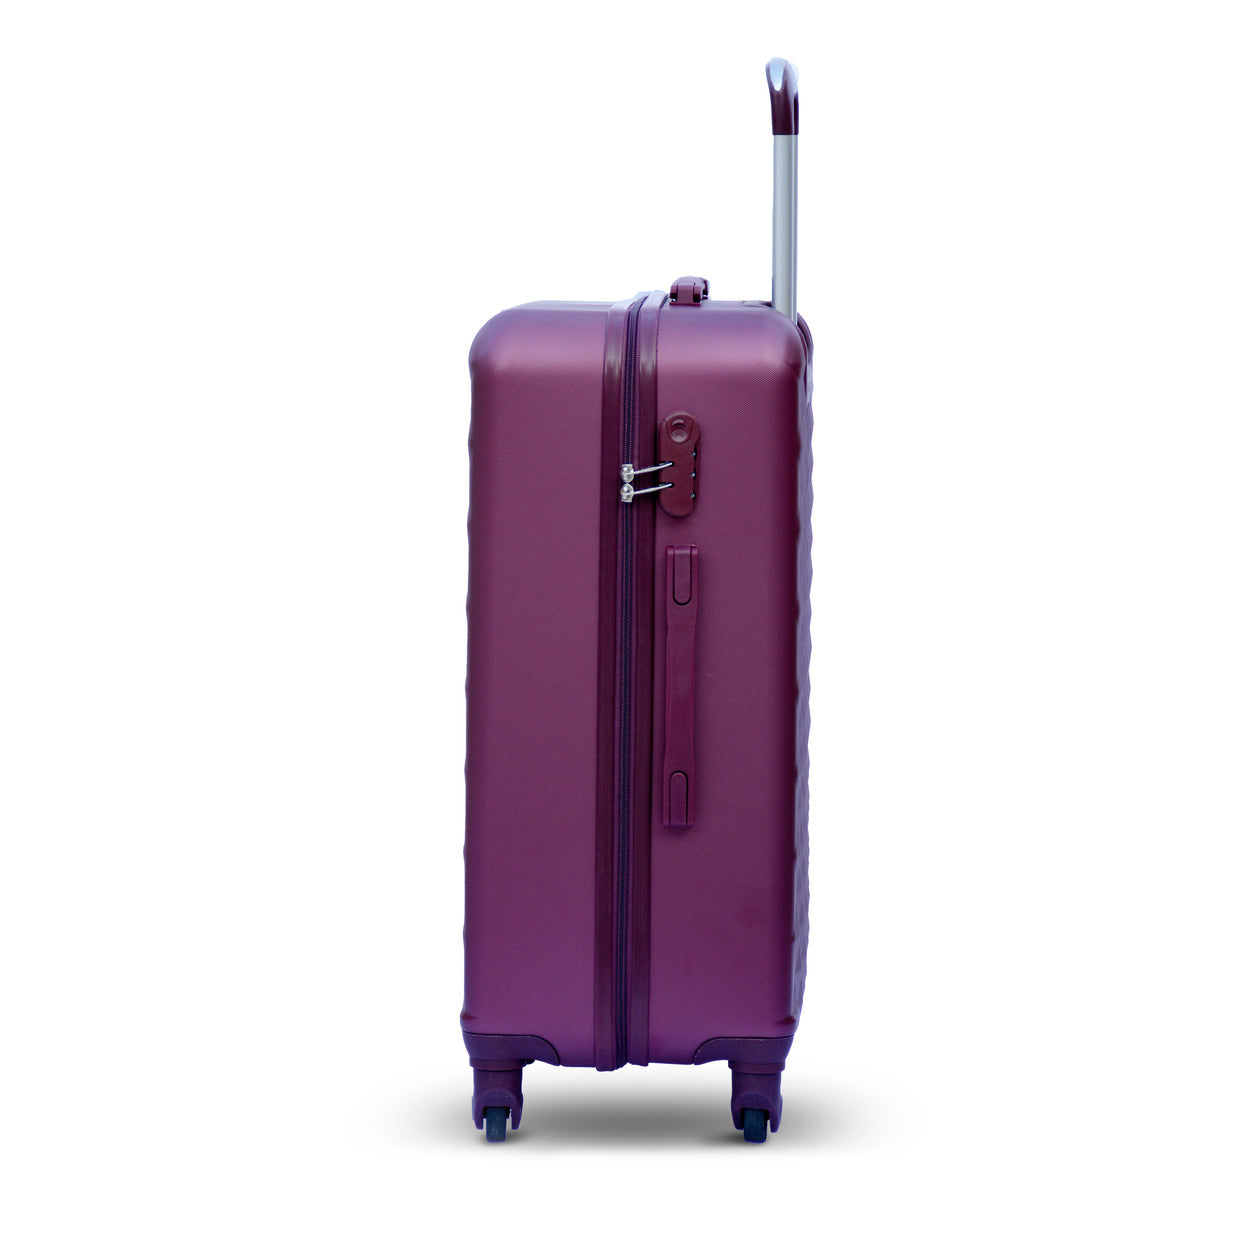 24" Maroon Colour Diamond Cut ABS Lightweight Luggage Bag With Spinner Wheel Zaappy.com